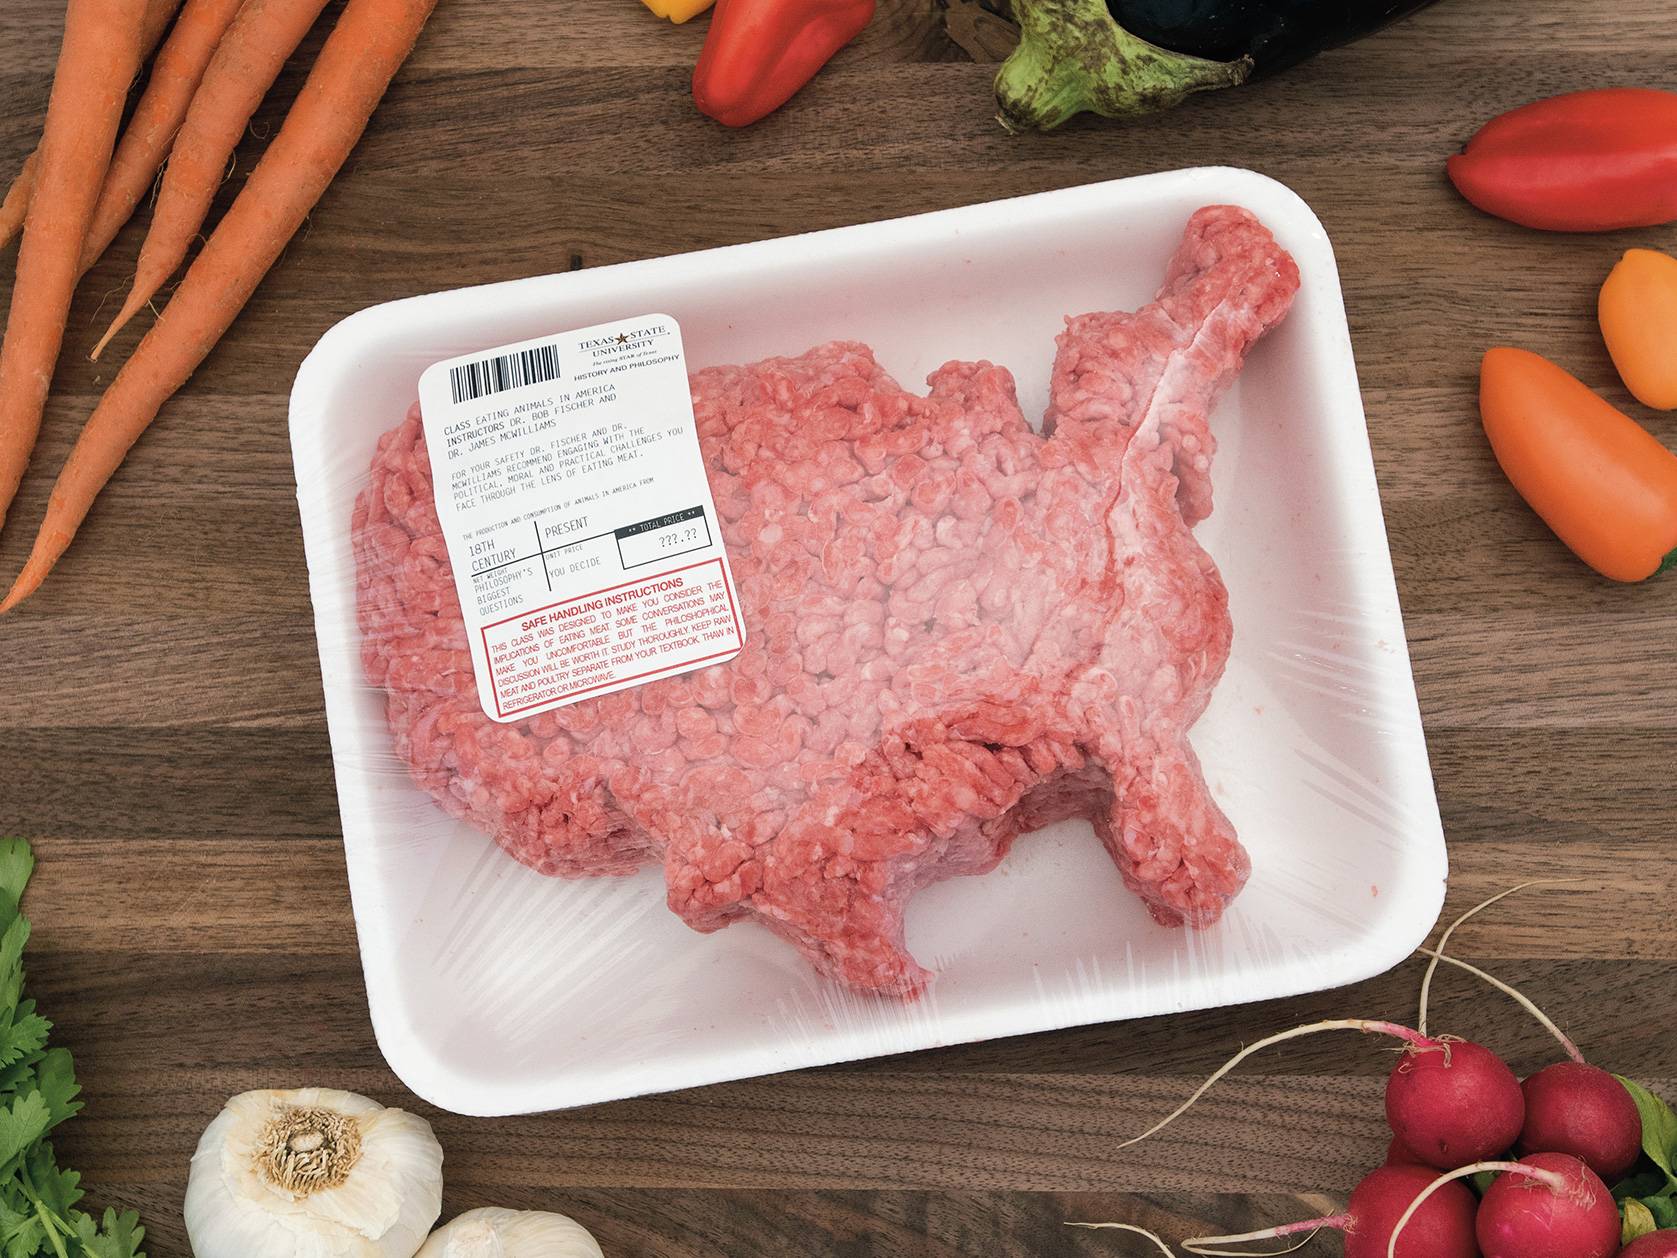 Ground beef in the shape of the USA surrounded by vegtables